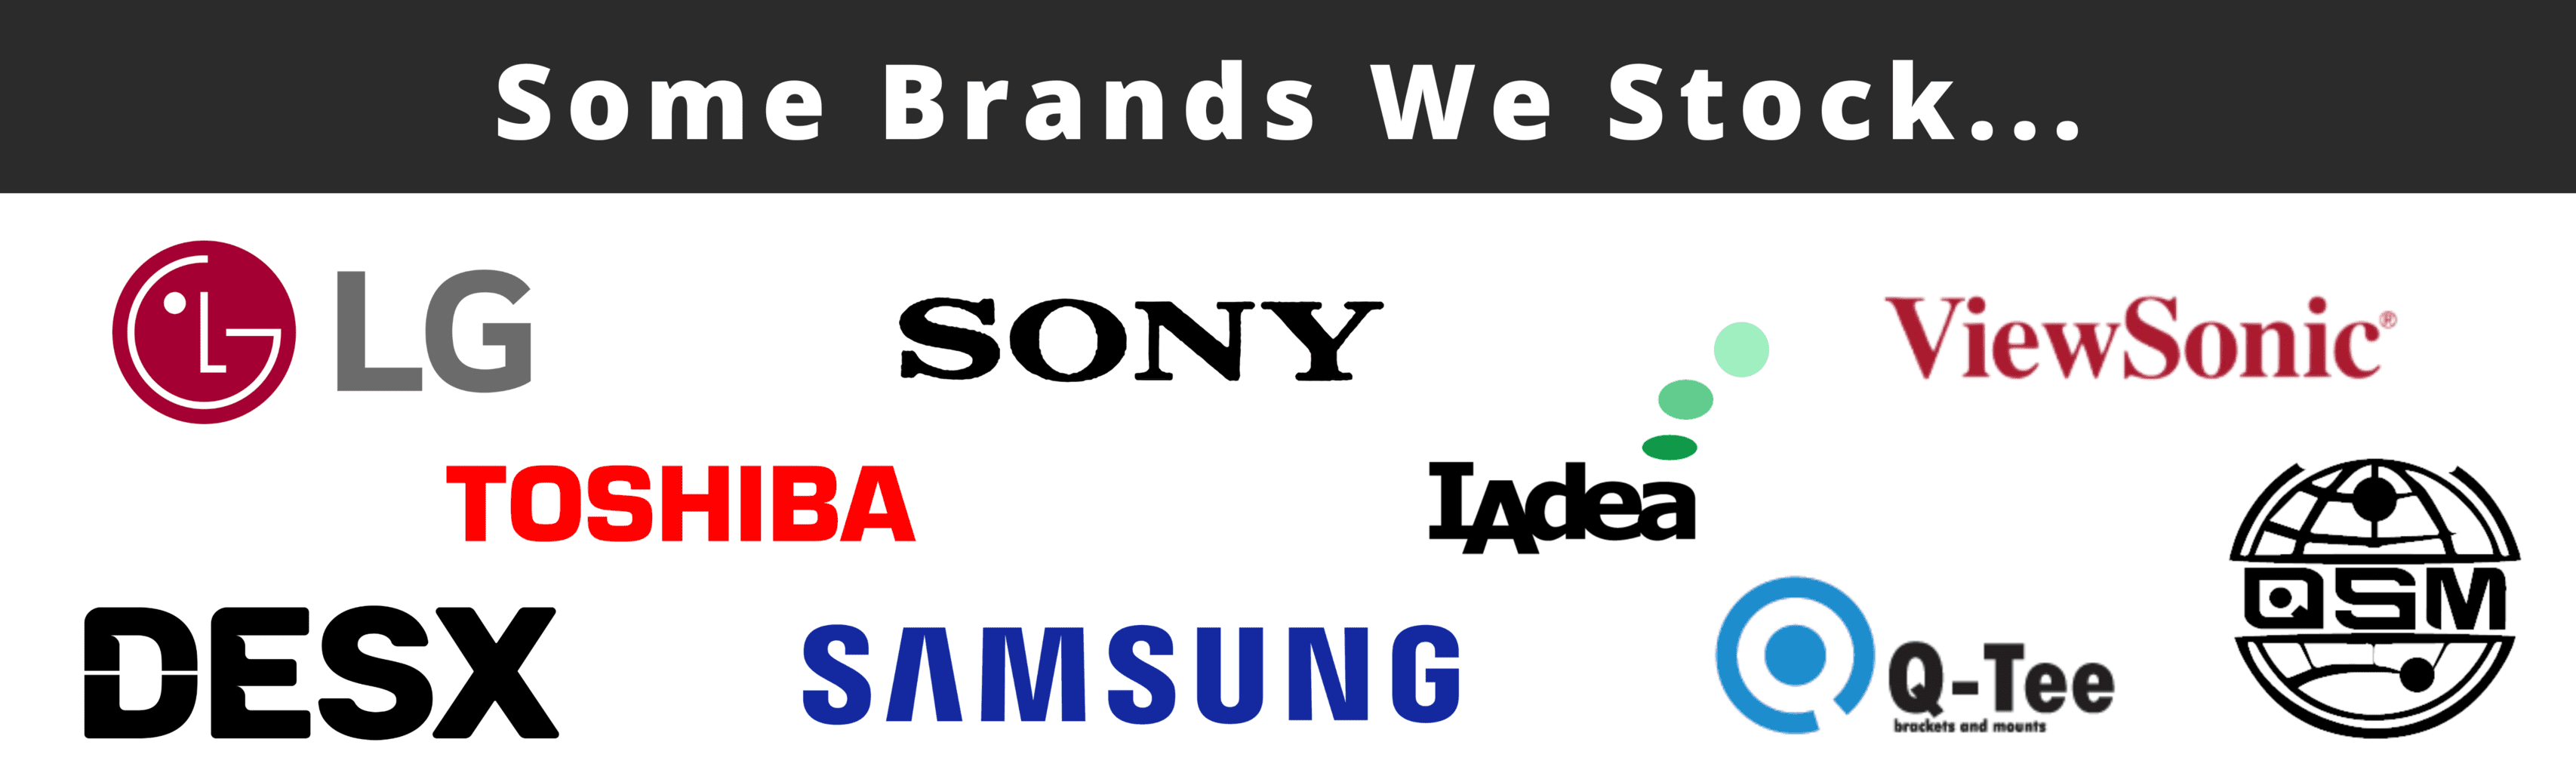 Some Brands We Stock...